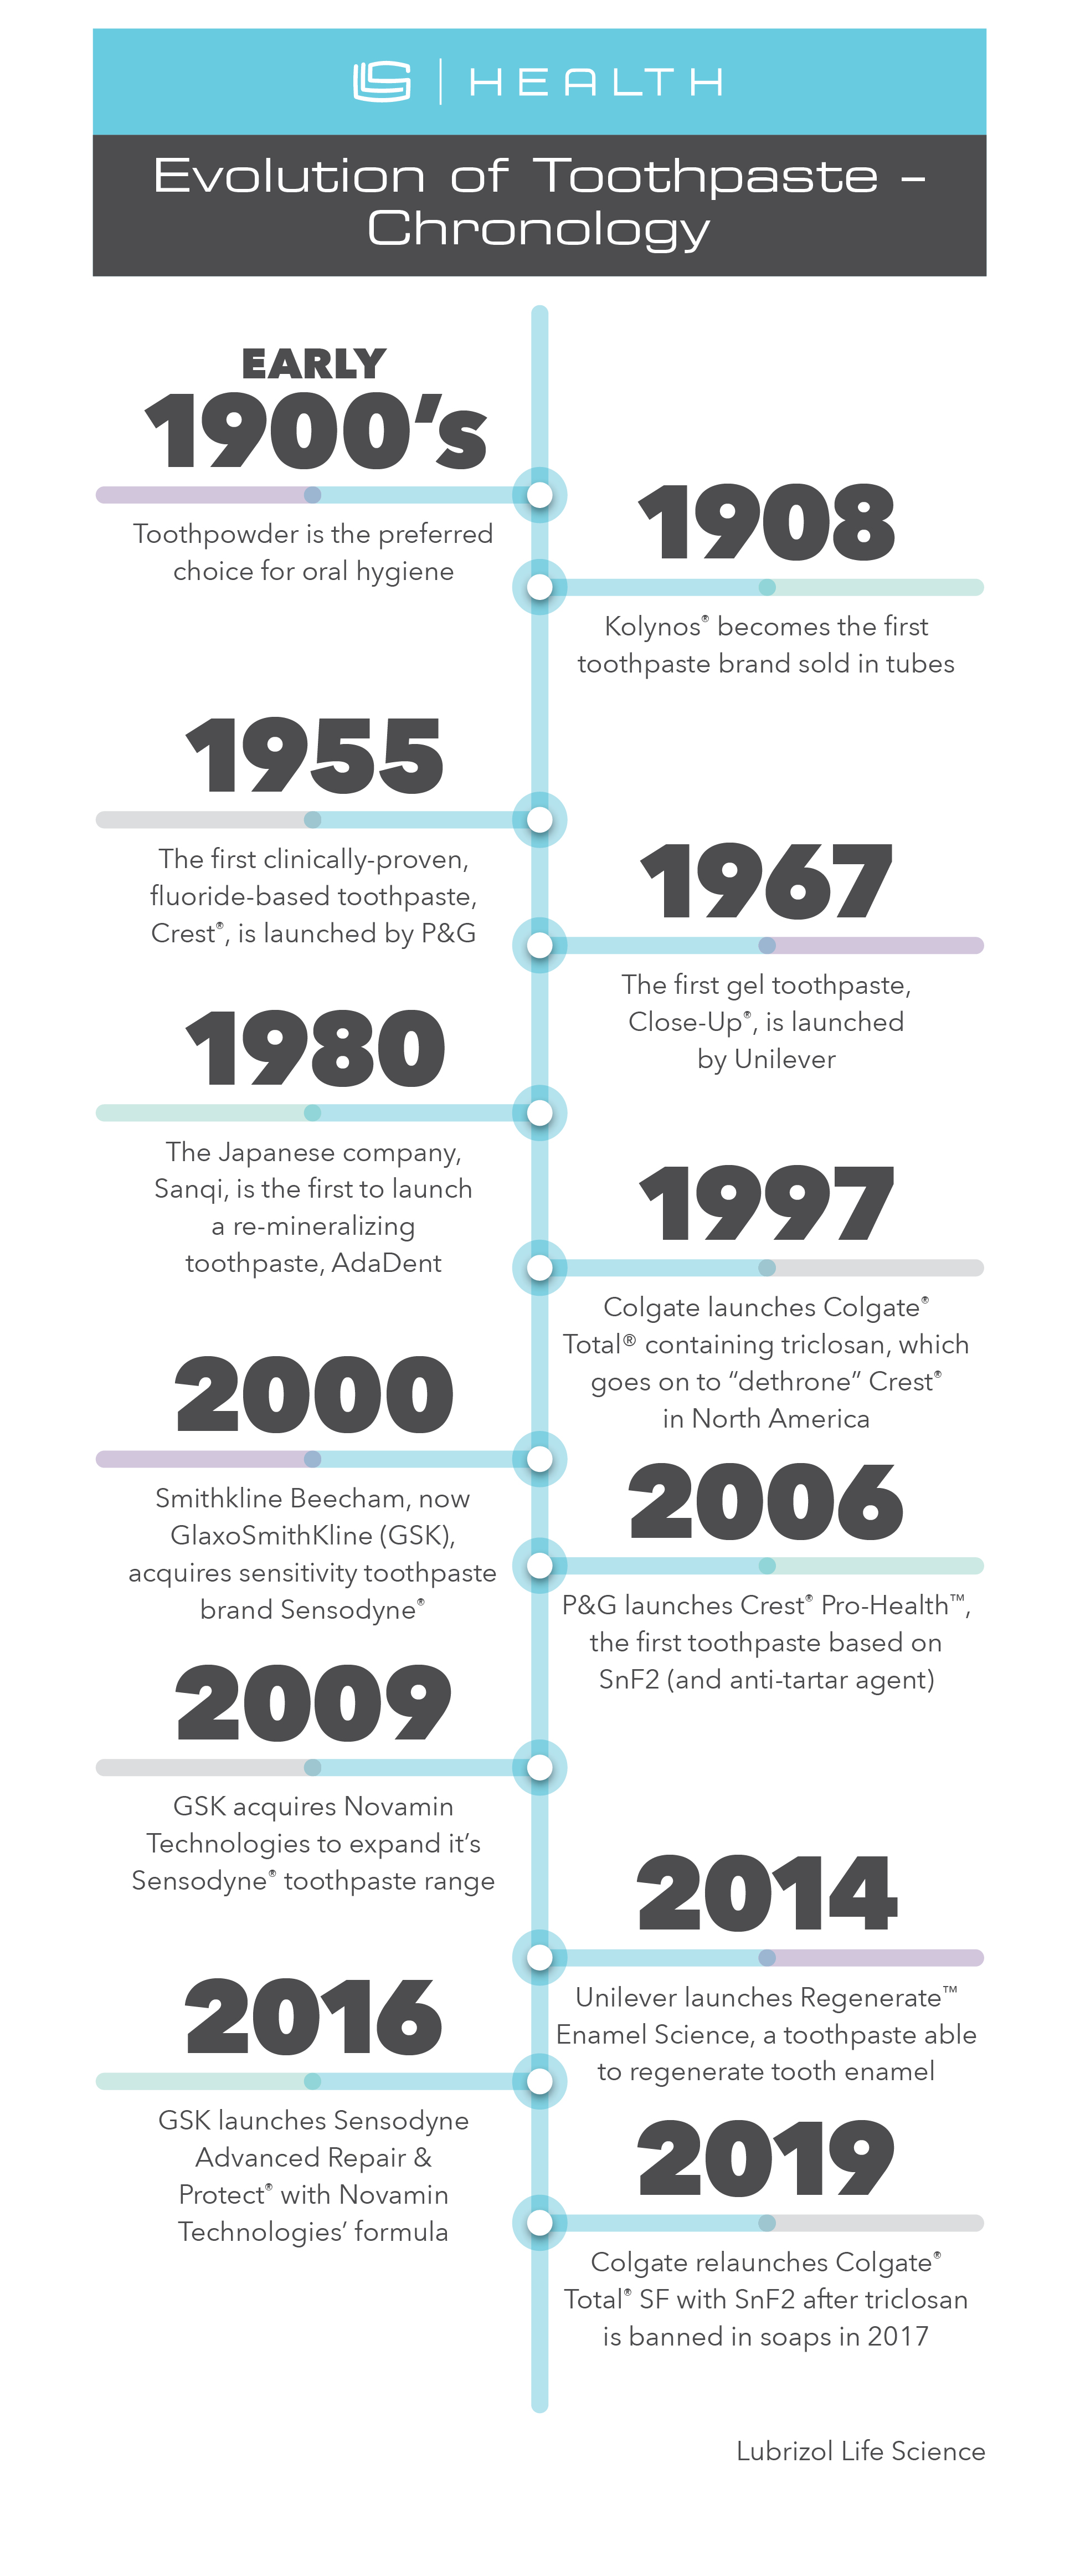 History and Evolution of Toothpaste